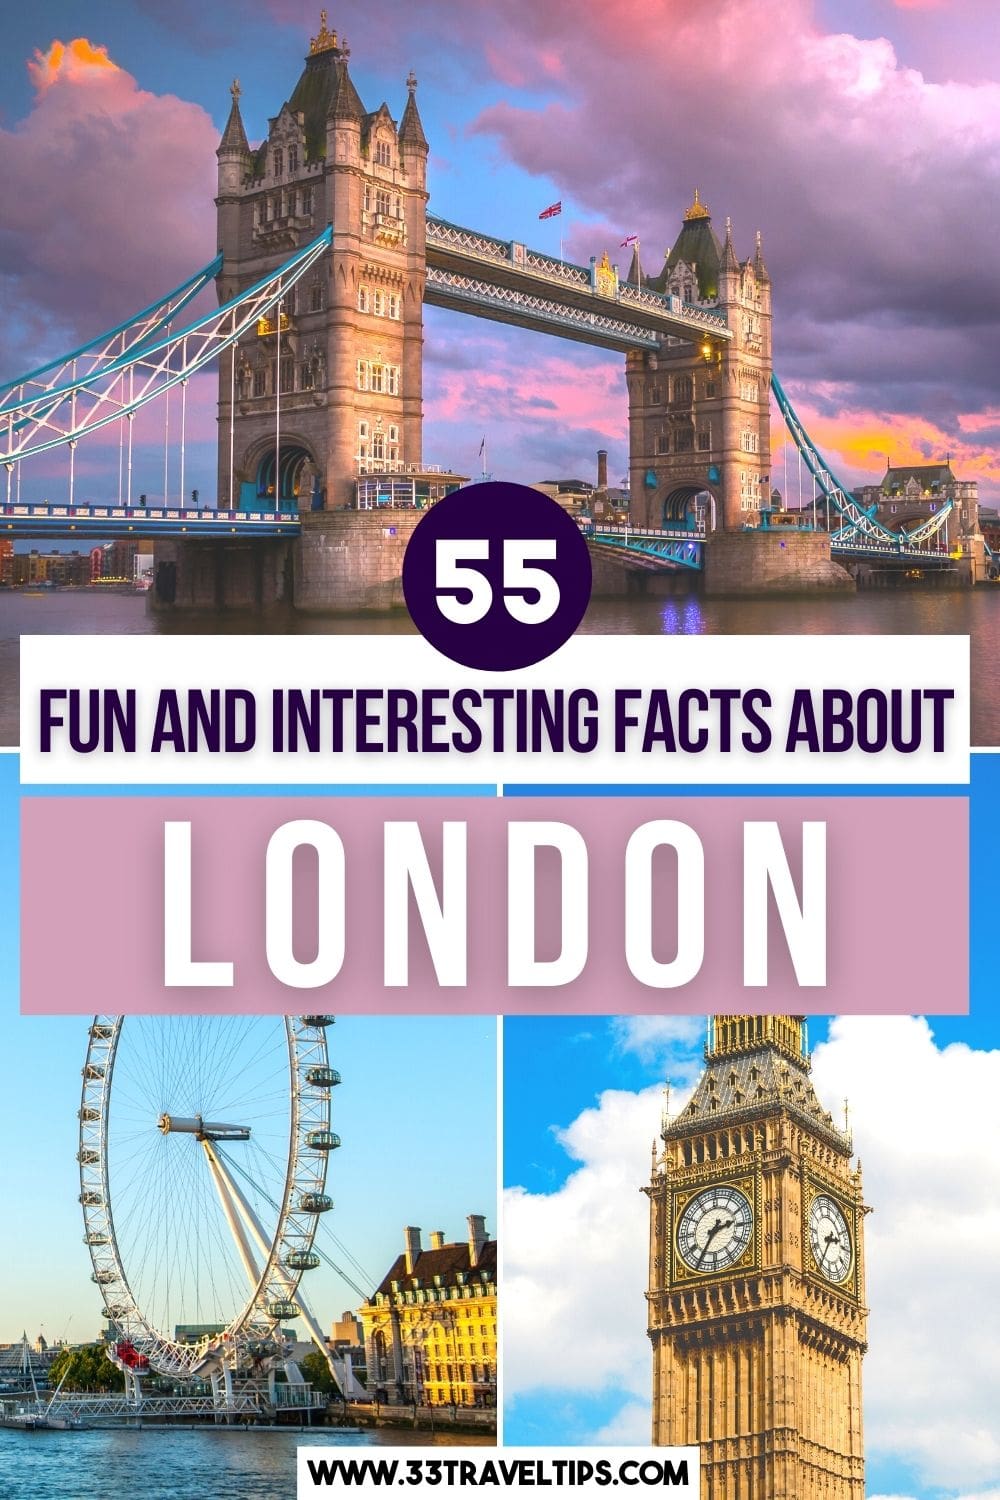 10 Facts About London